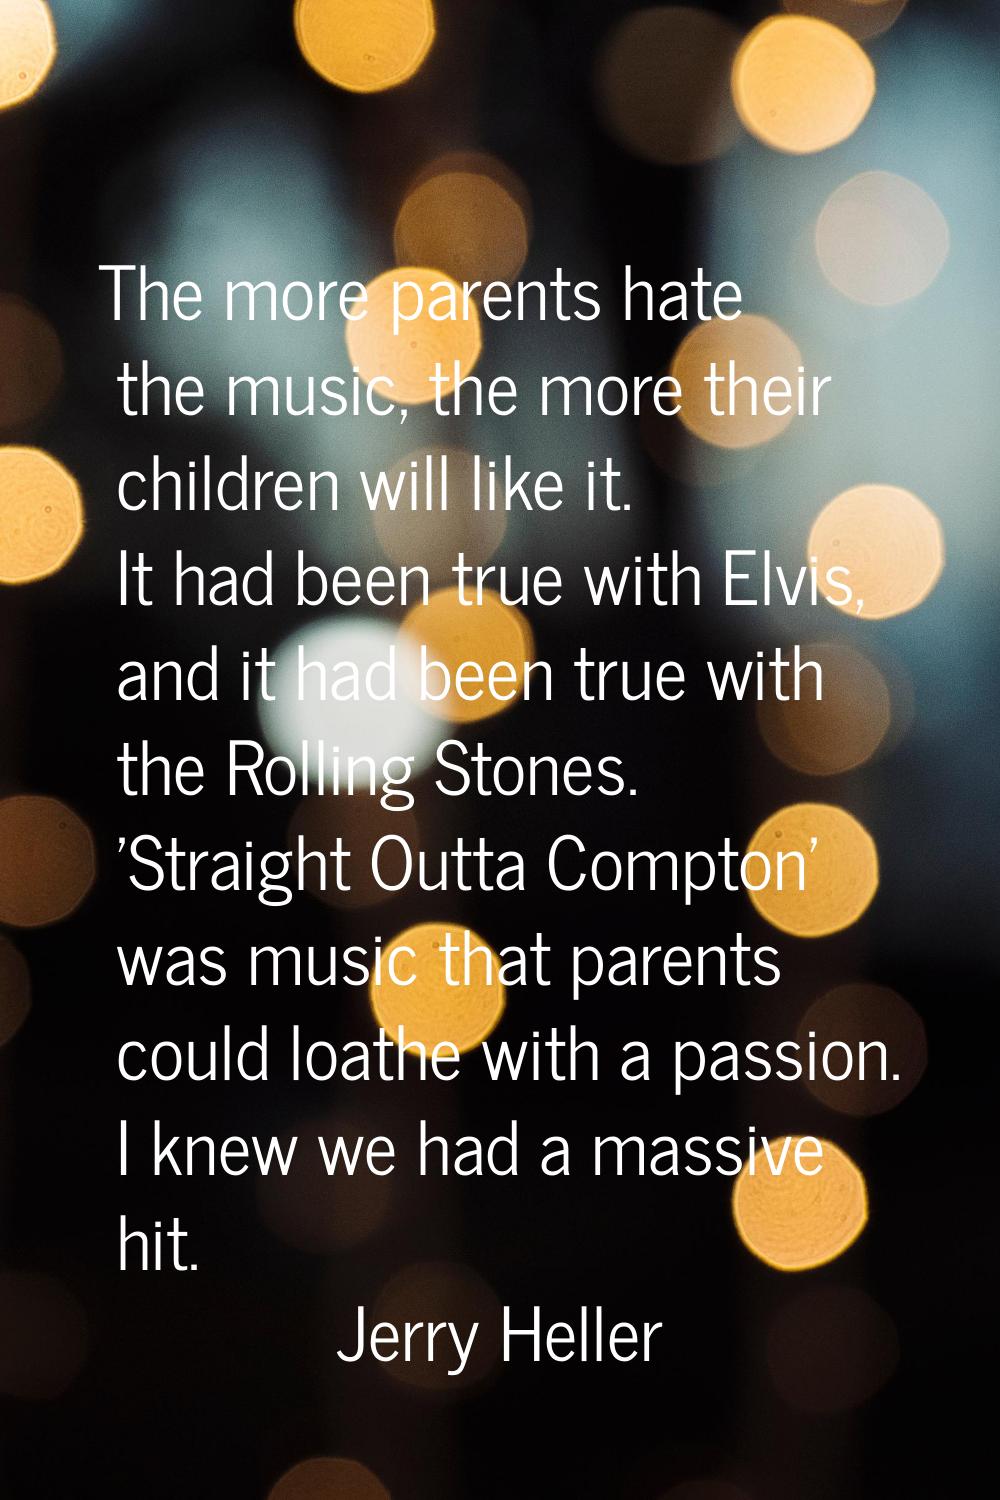 The more parents hate the music, the more their children will like it. It had been true with Elvis,